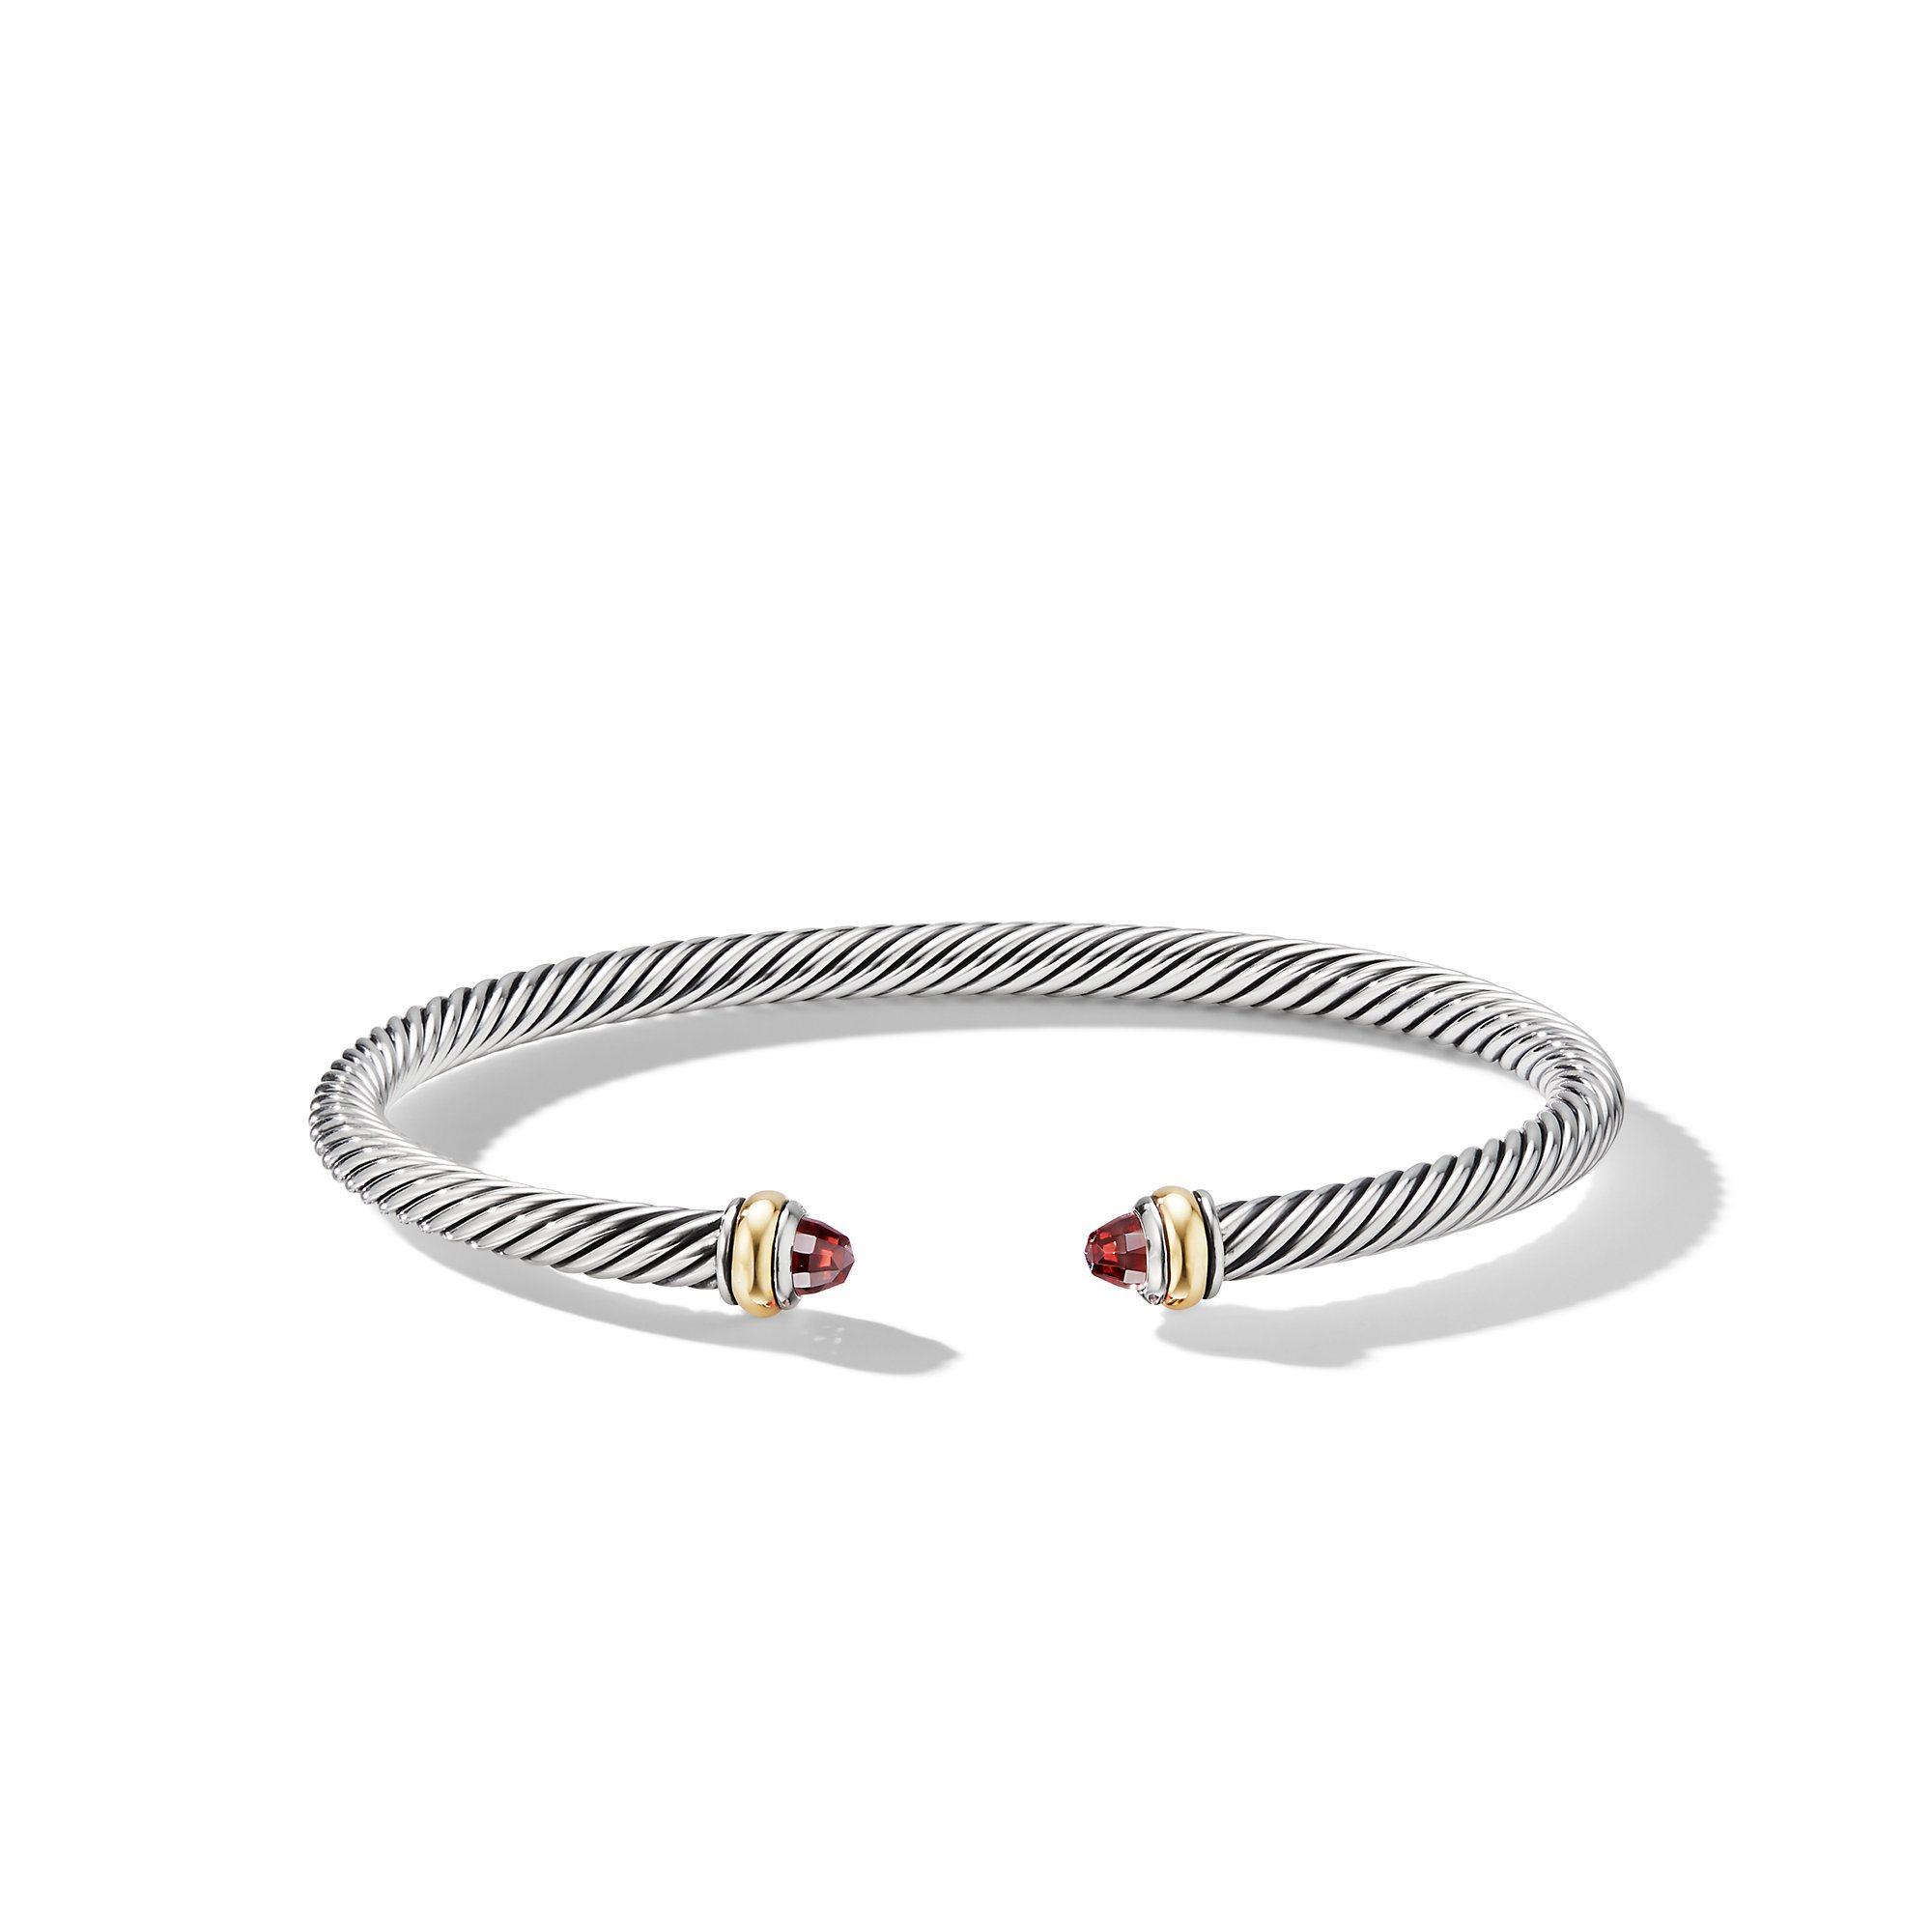 David Yurman 4mm Classic Cable Bracelet in Sterling Silver with Gold and Garnets